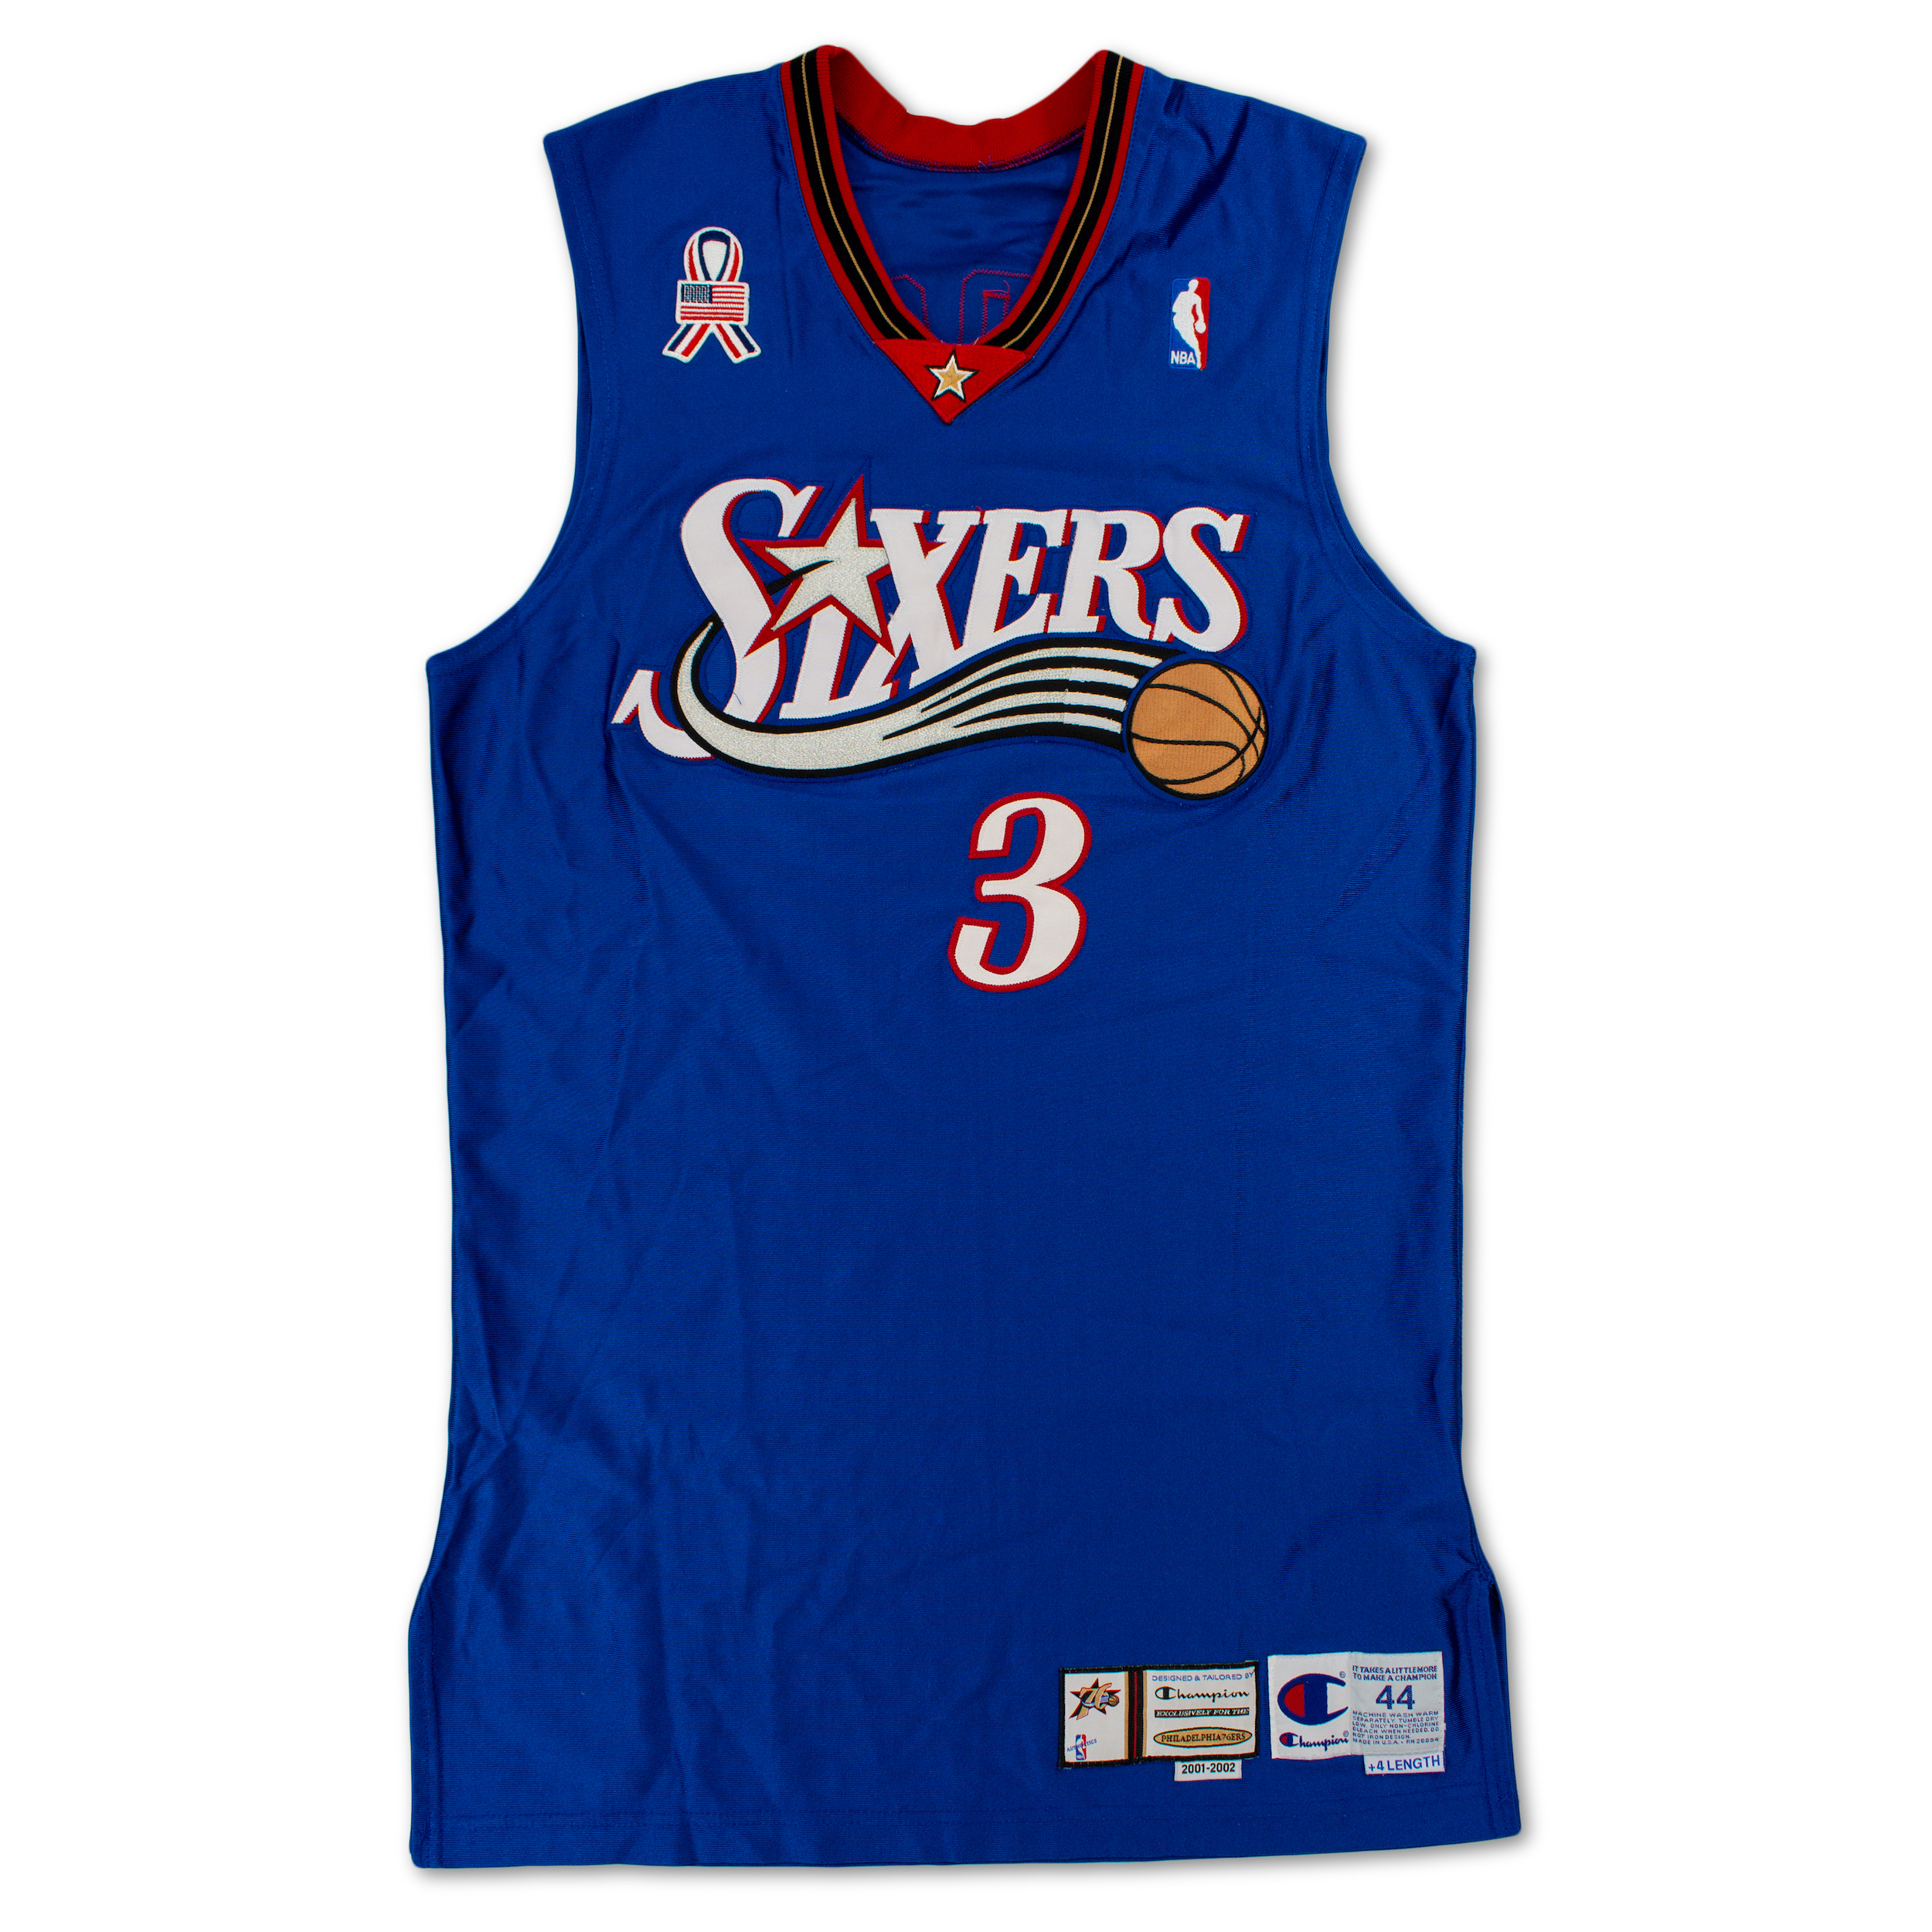 2001 76ers jersey